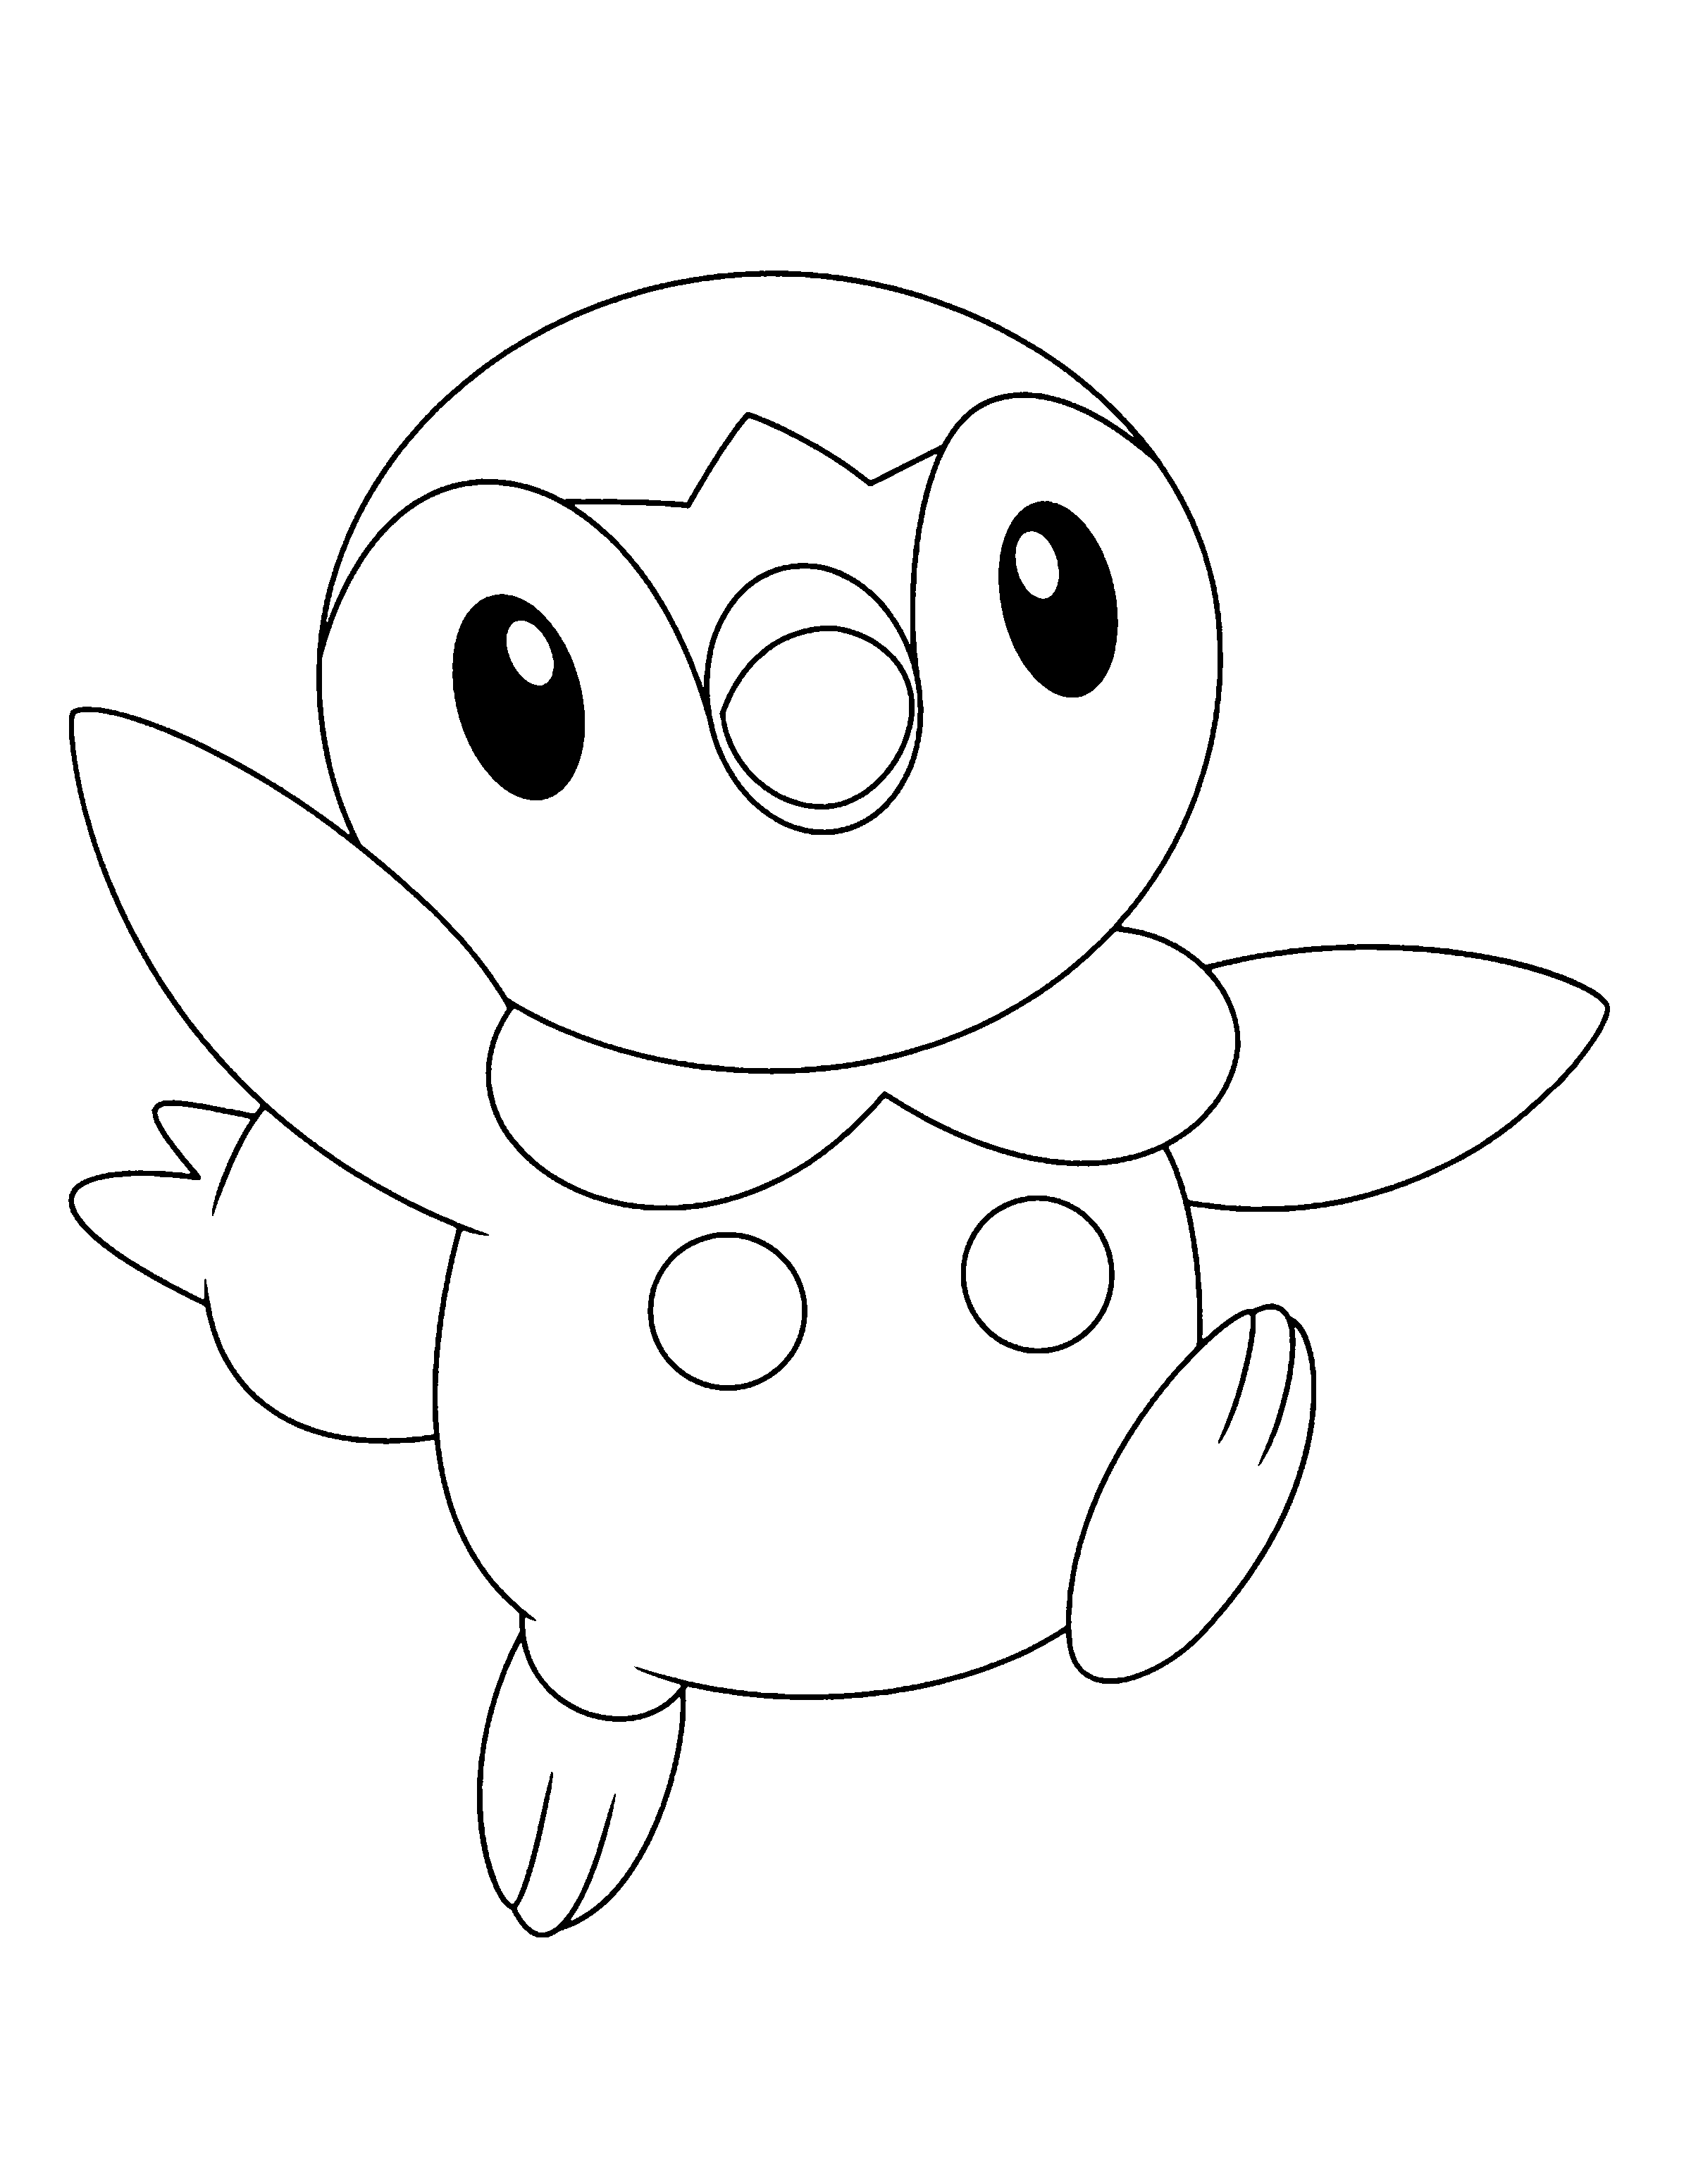 Free printable pokemon coloring pages 37 pics HOWTODRAW in 1 minute